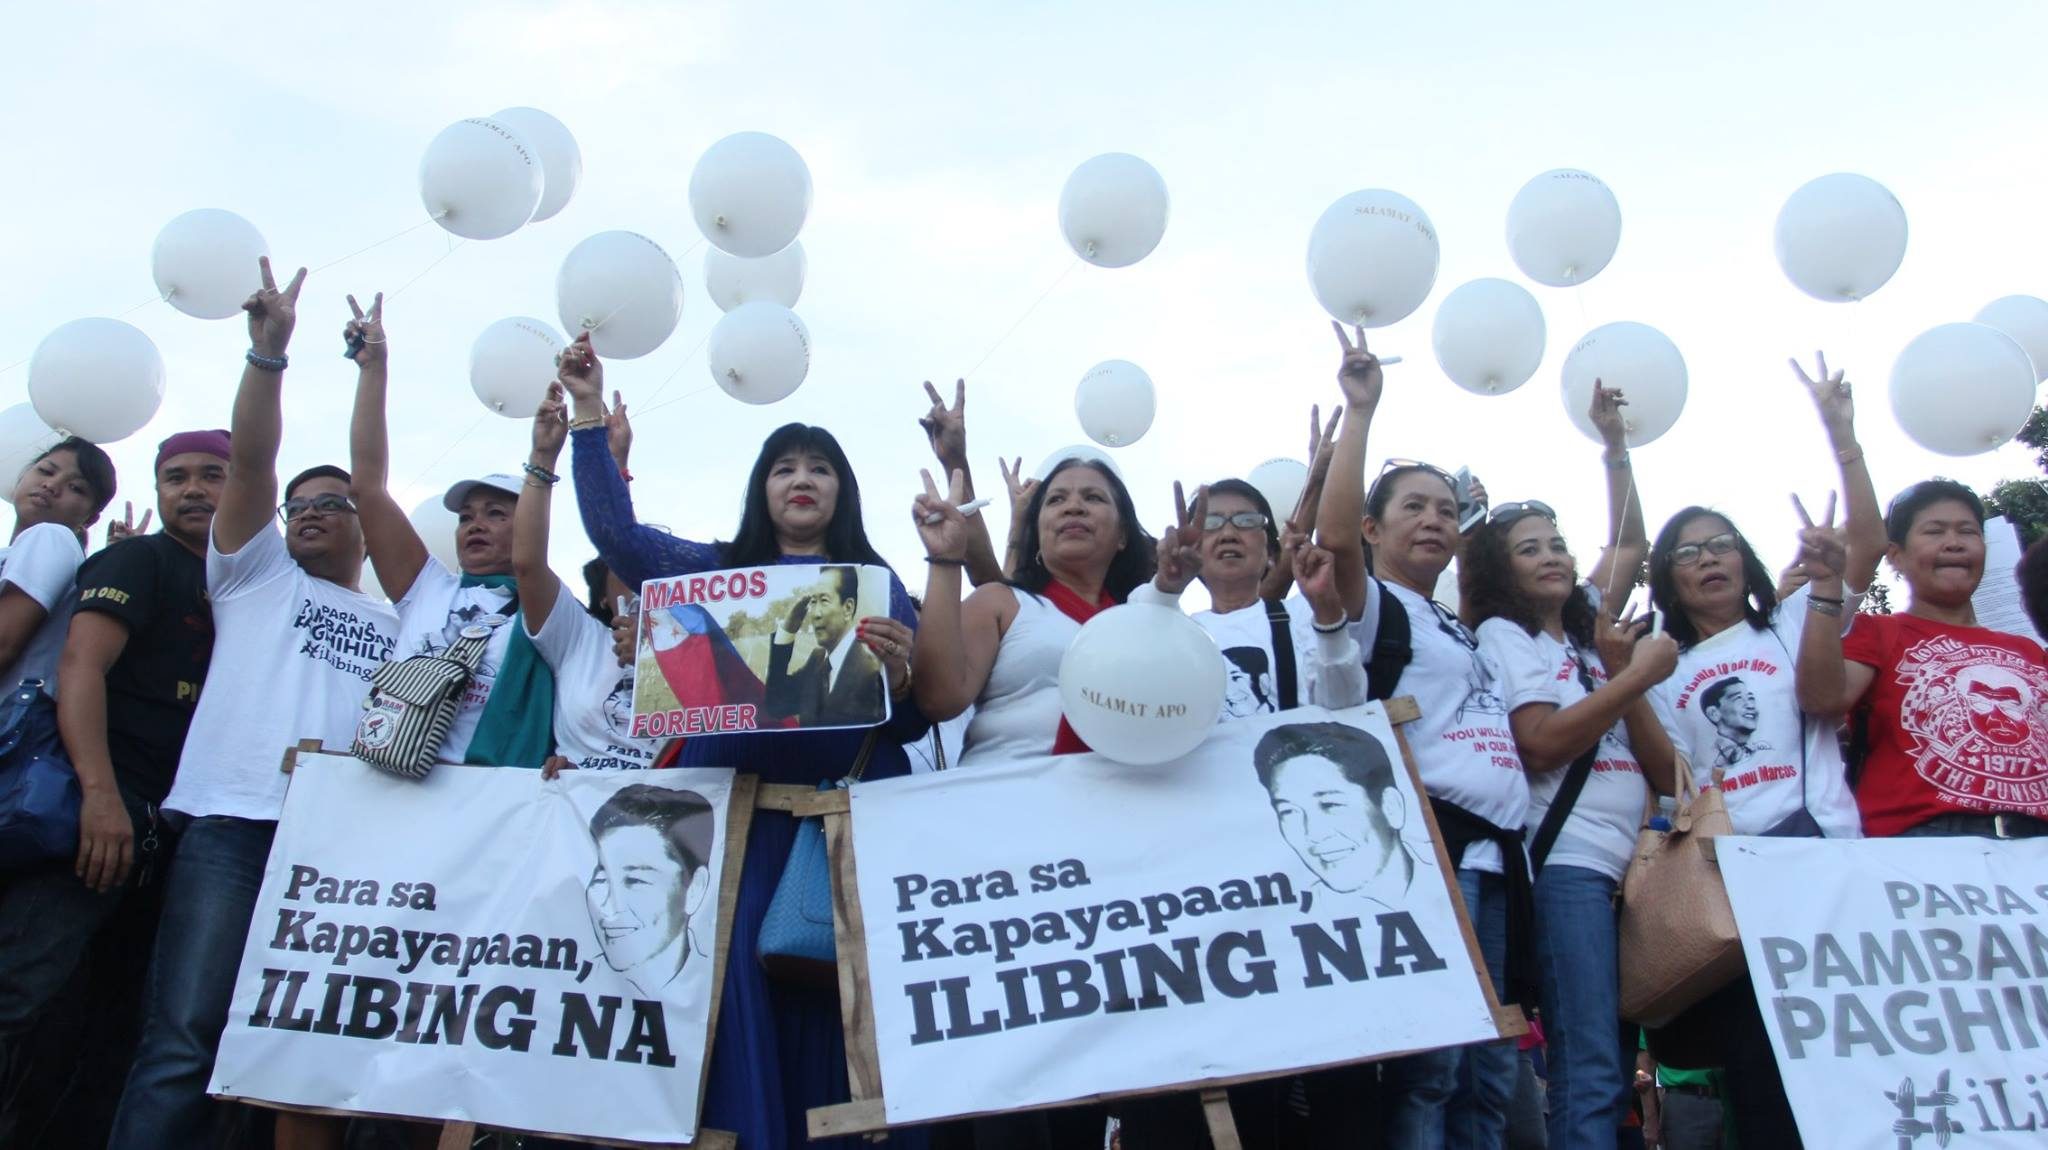 Marcos loyalists to SC: Hero’s burial for national healing, unity